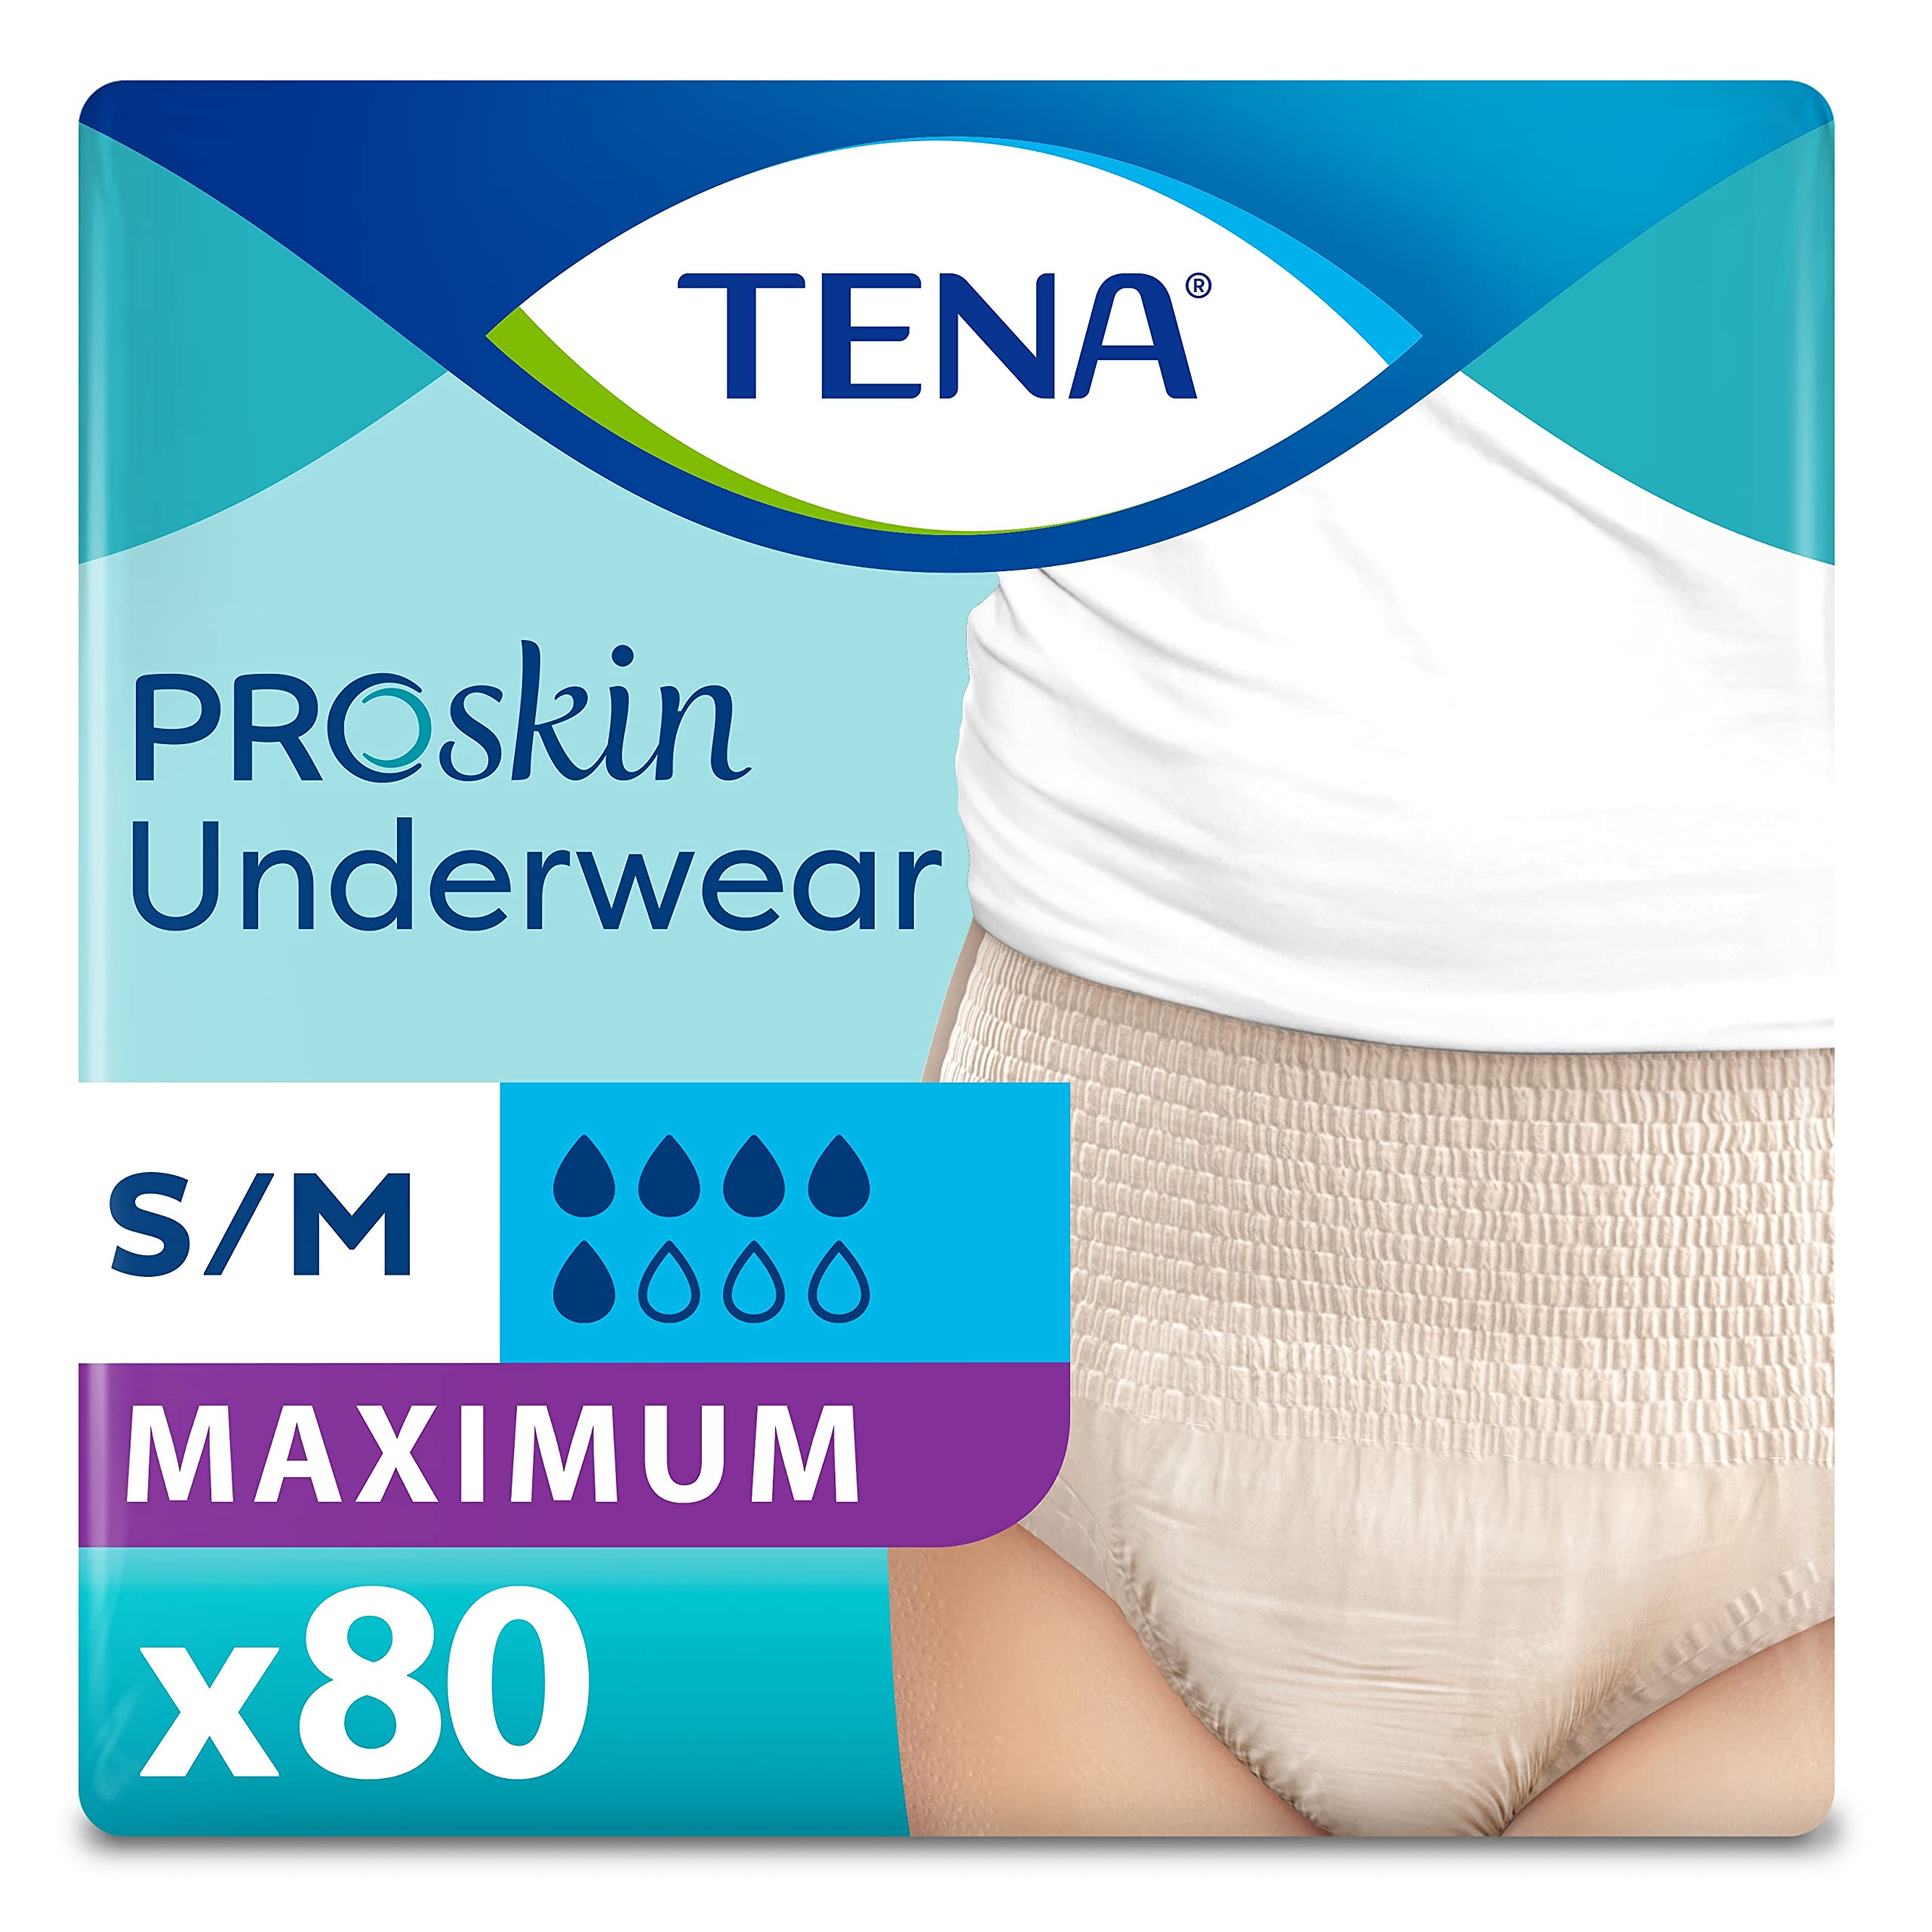 TENA ProSkin Incontinence Underwear for Women, Maximum Absorbency,  Small/Medium, 80 Count (4 Packs of 20)